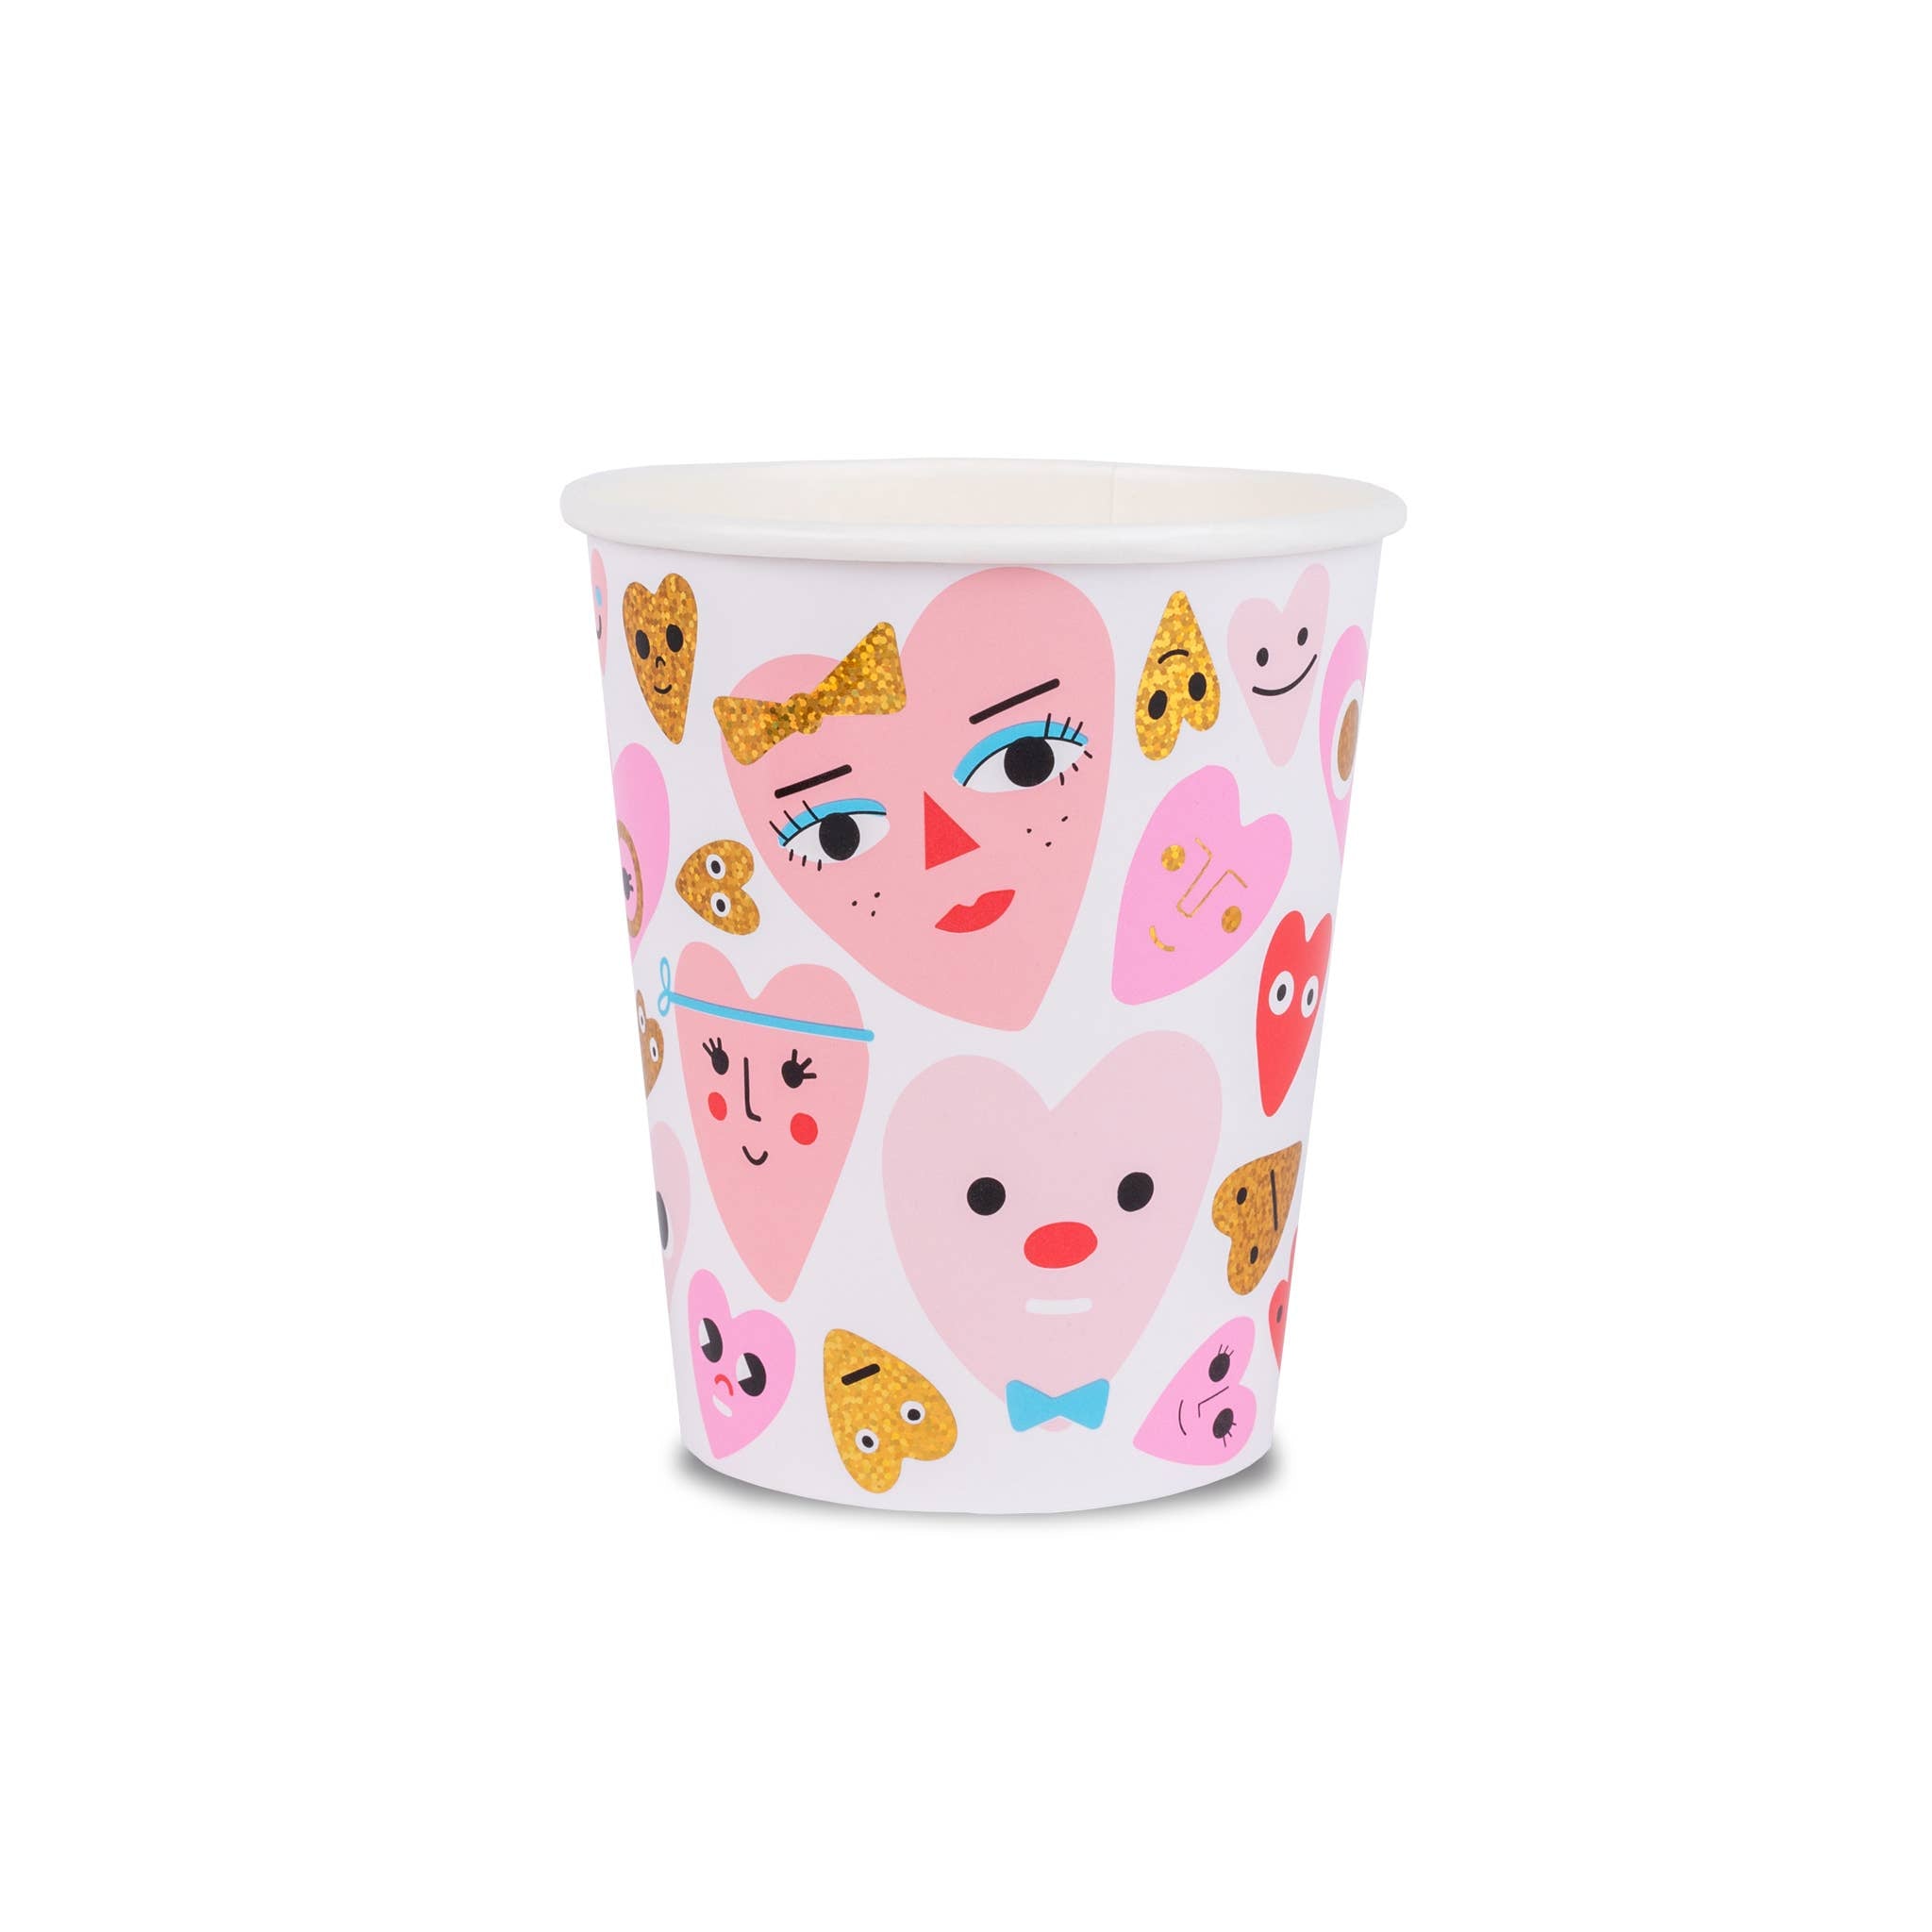 Heartbeat Gang 9 oz Cups - 8 Pk. - Oh My Darling Party Co-Faire #Fringe_Backdrop#